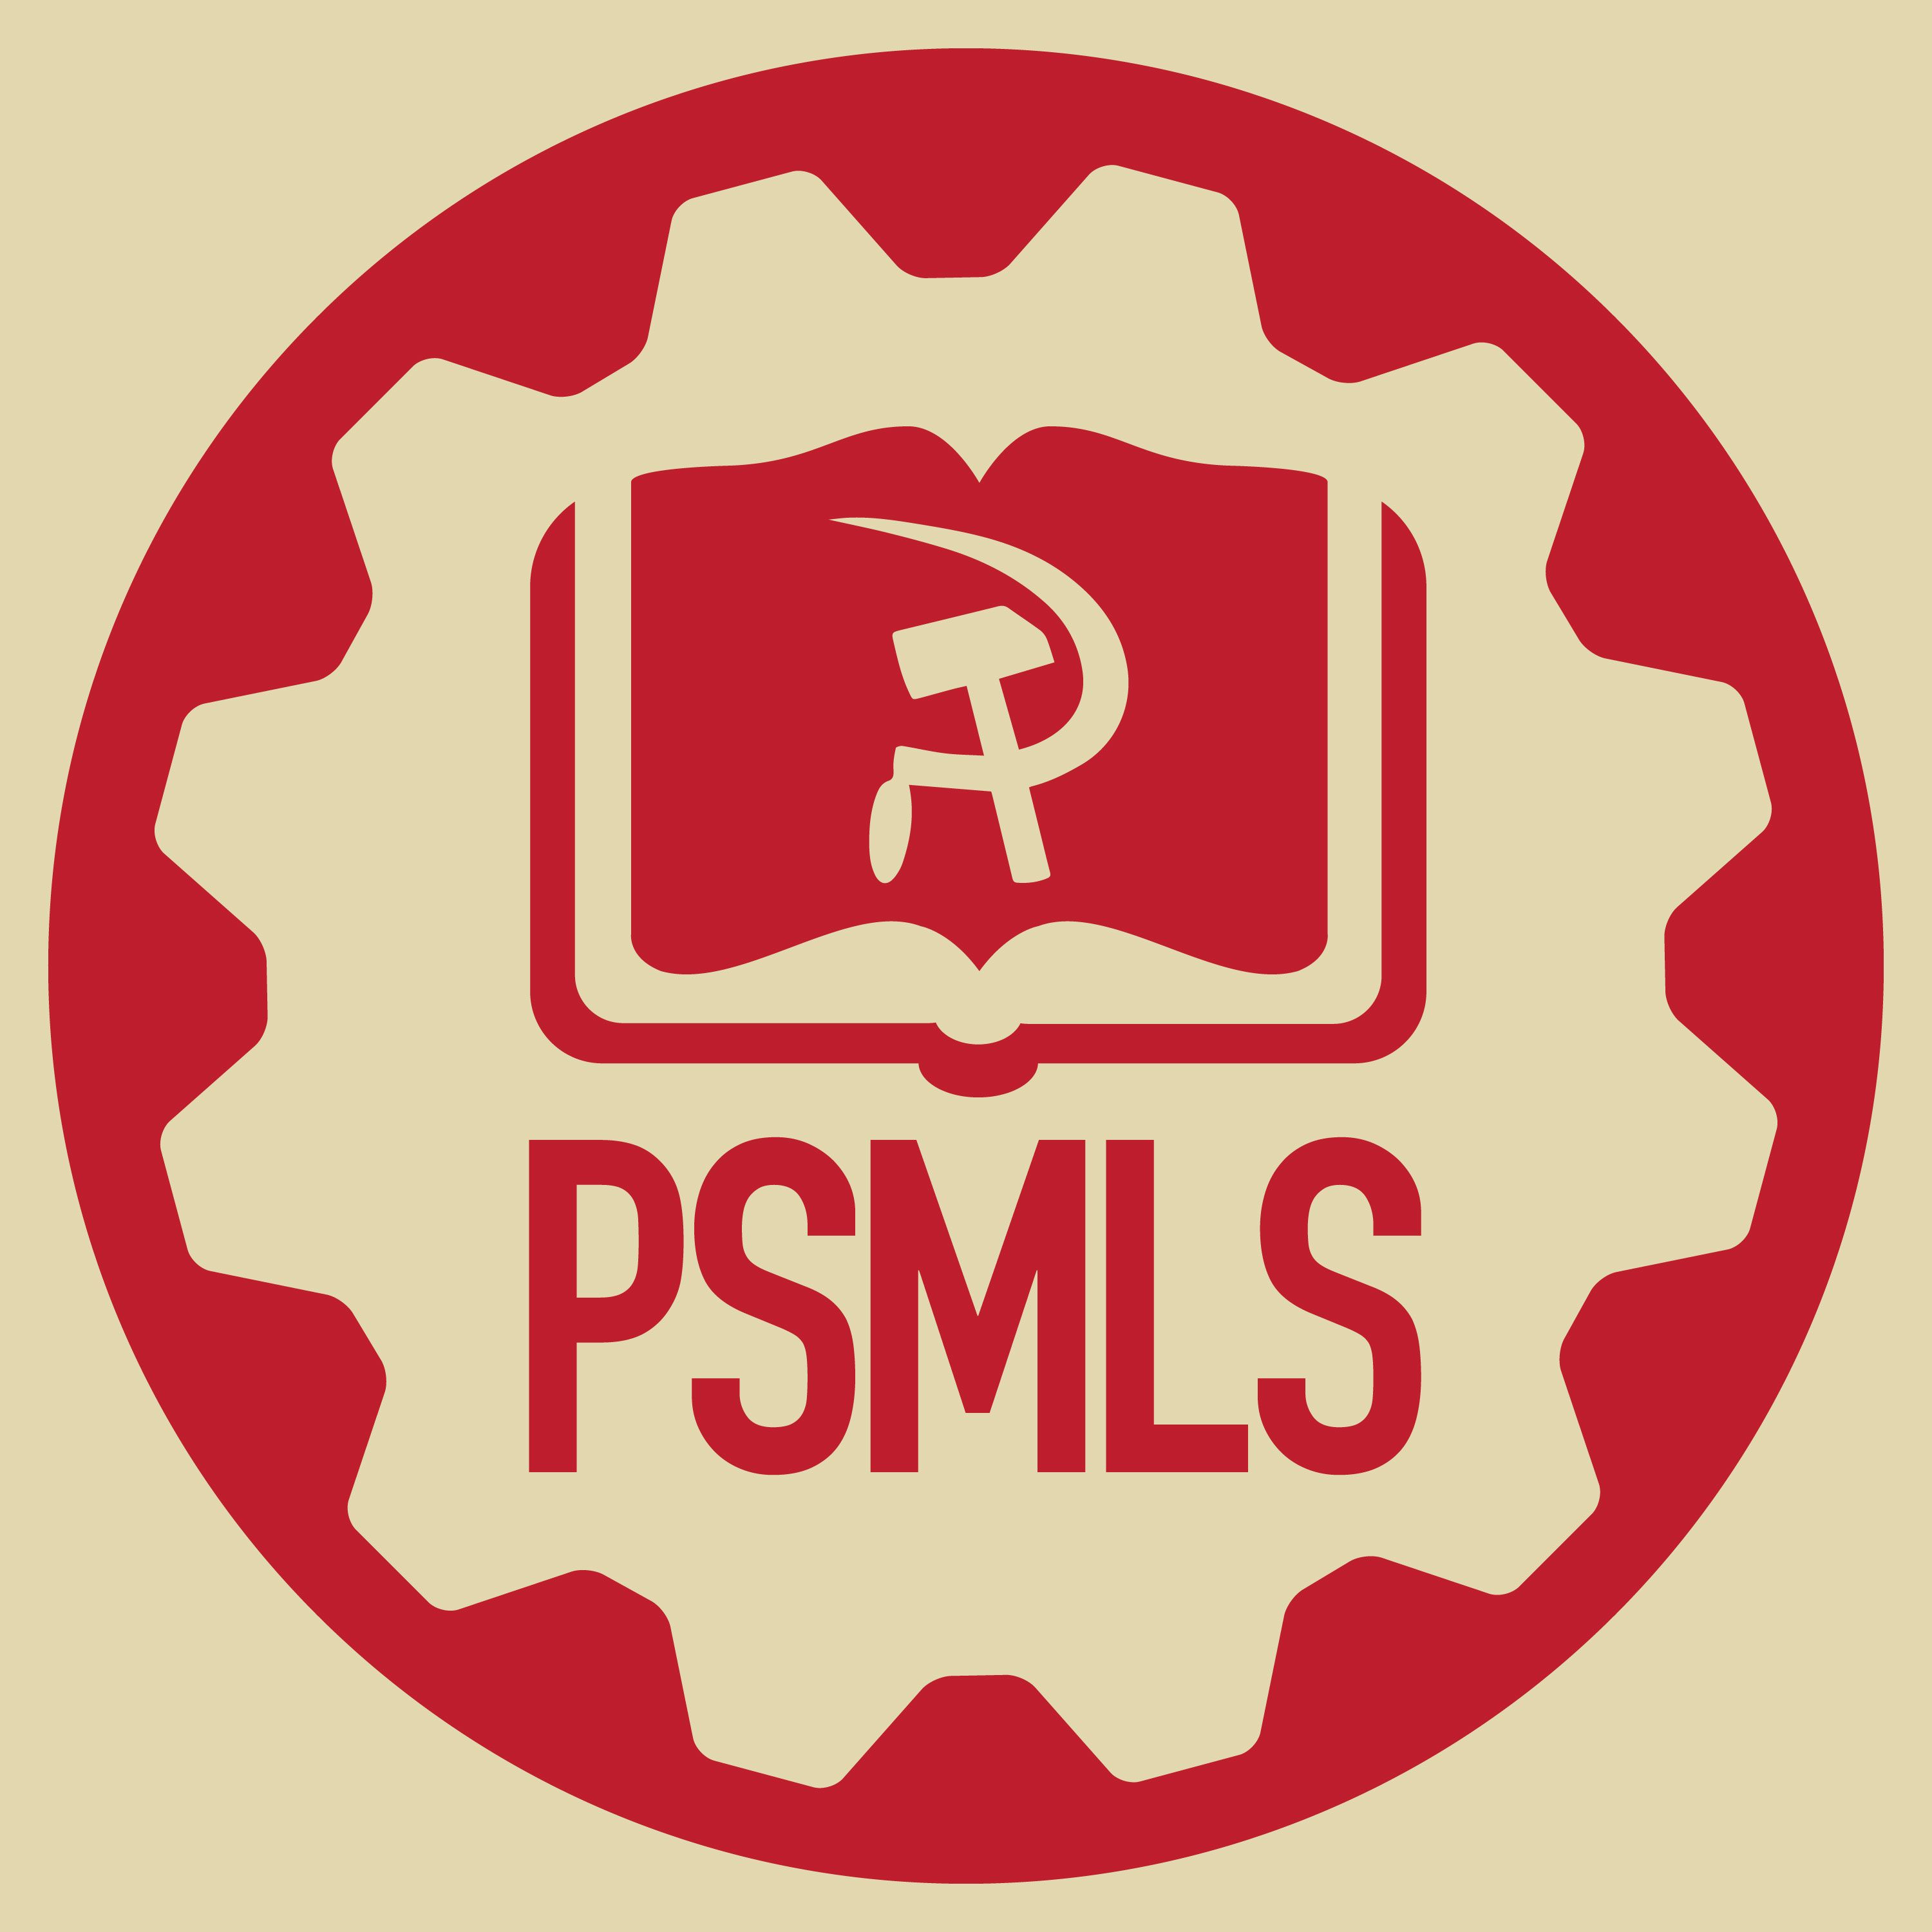 The People’s School for Marxist-Leninist Studies